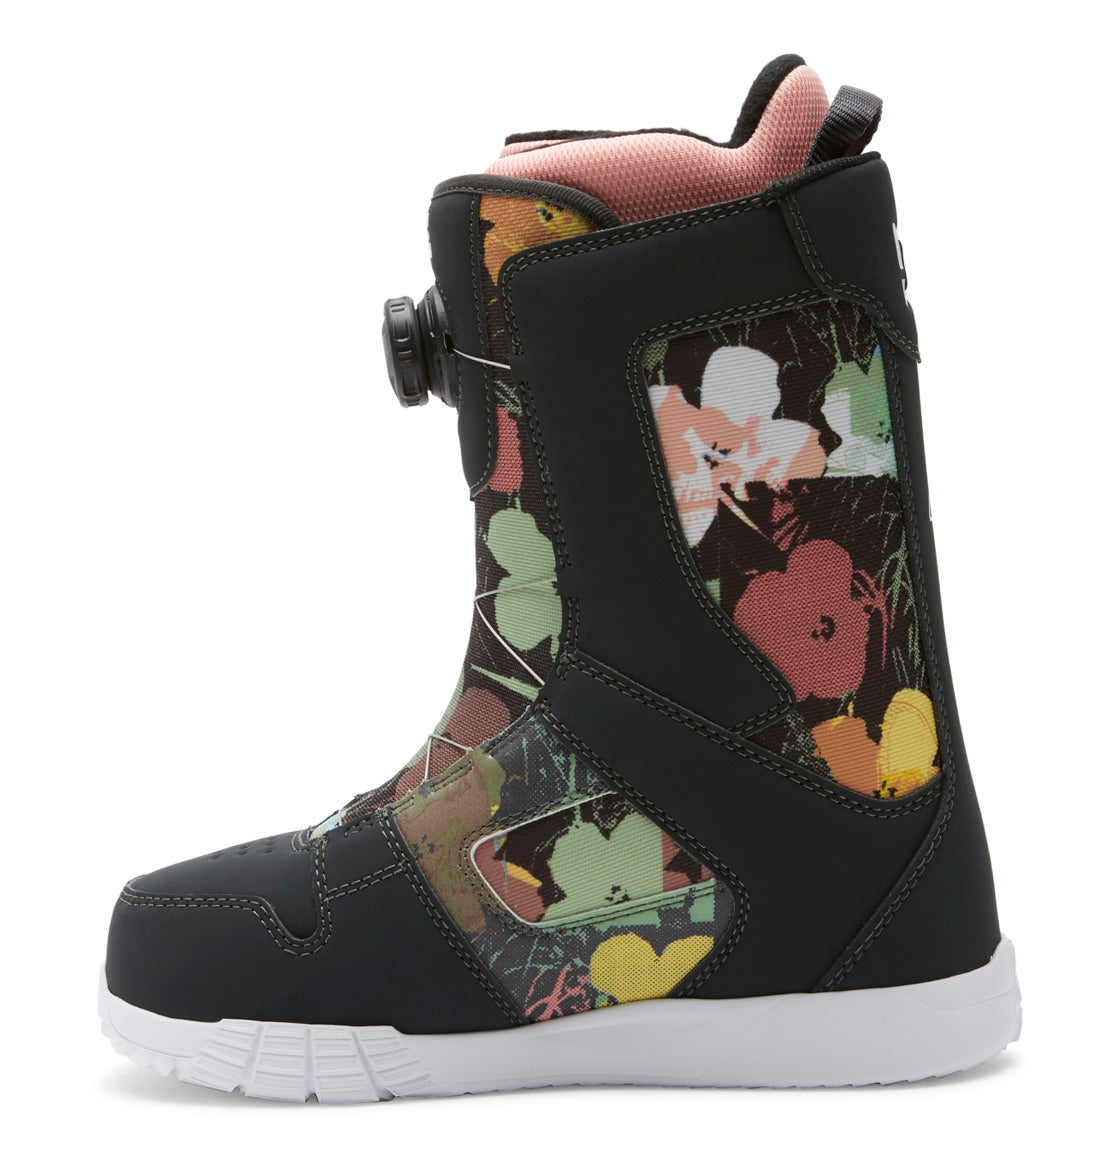 Women's Andy Warhol x DC Shoes Phase BOA® Snowboard Boots - DC Shoes